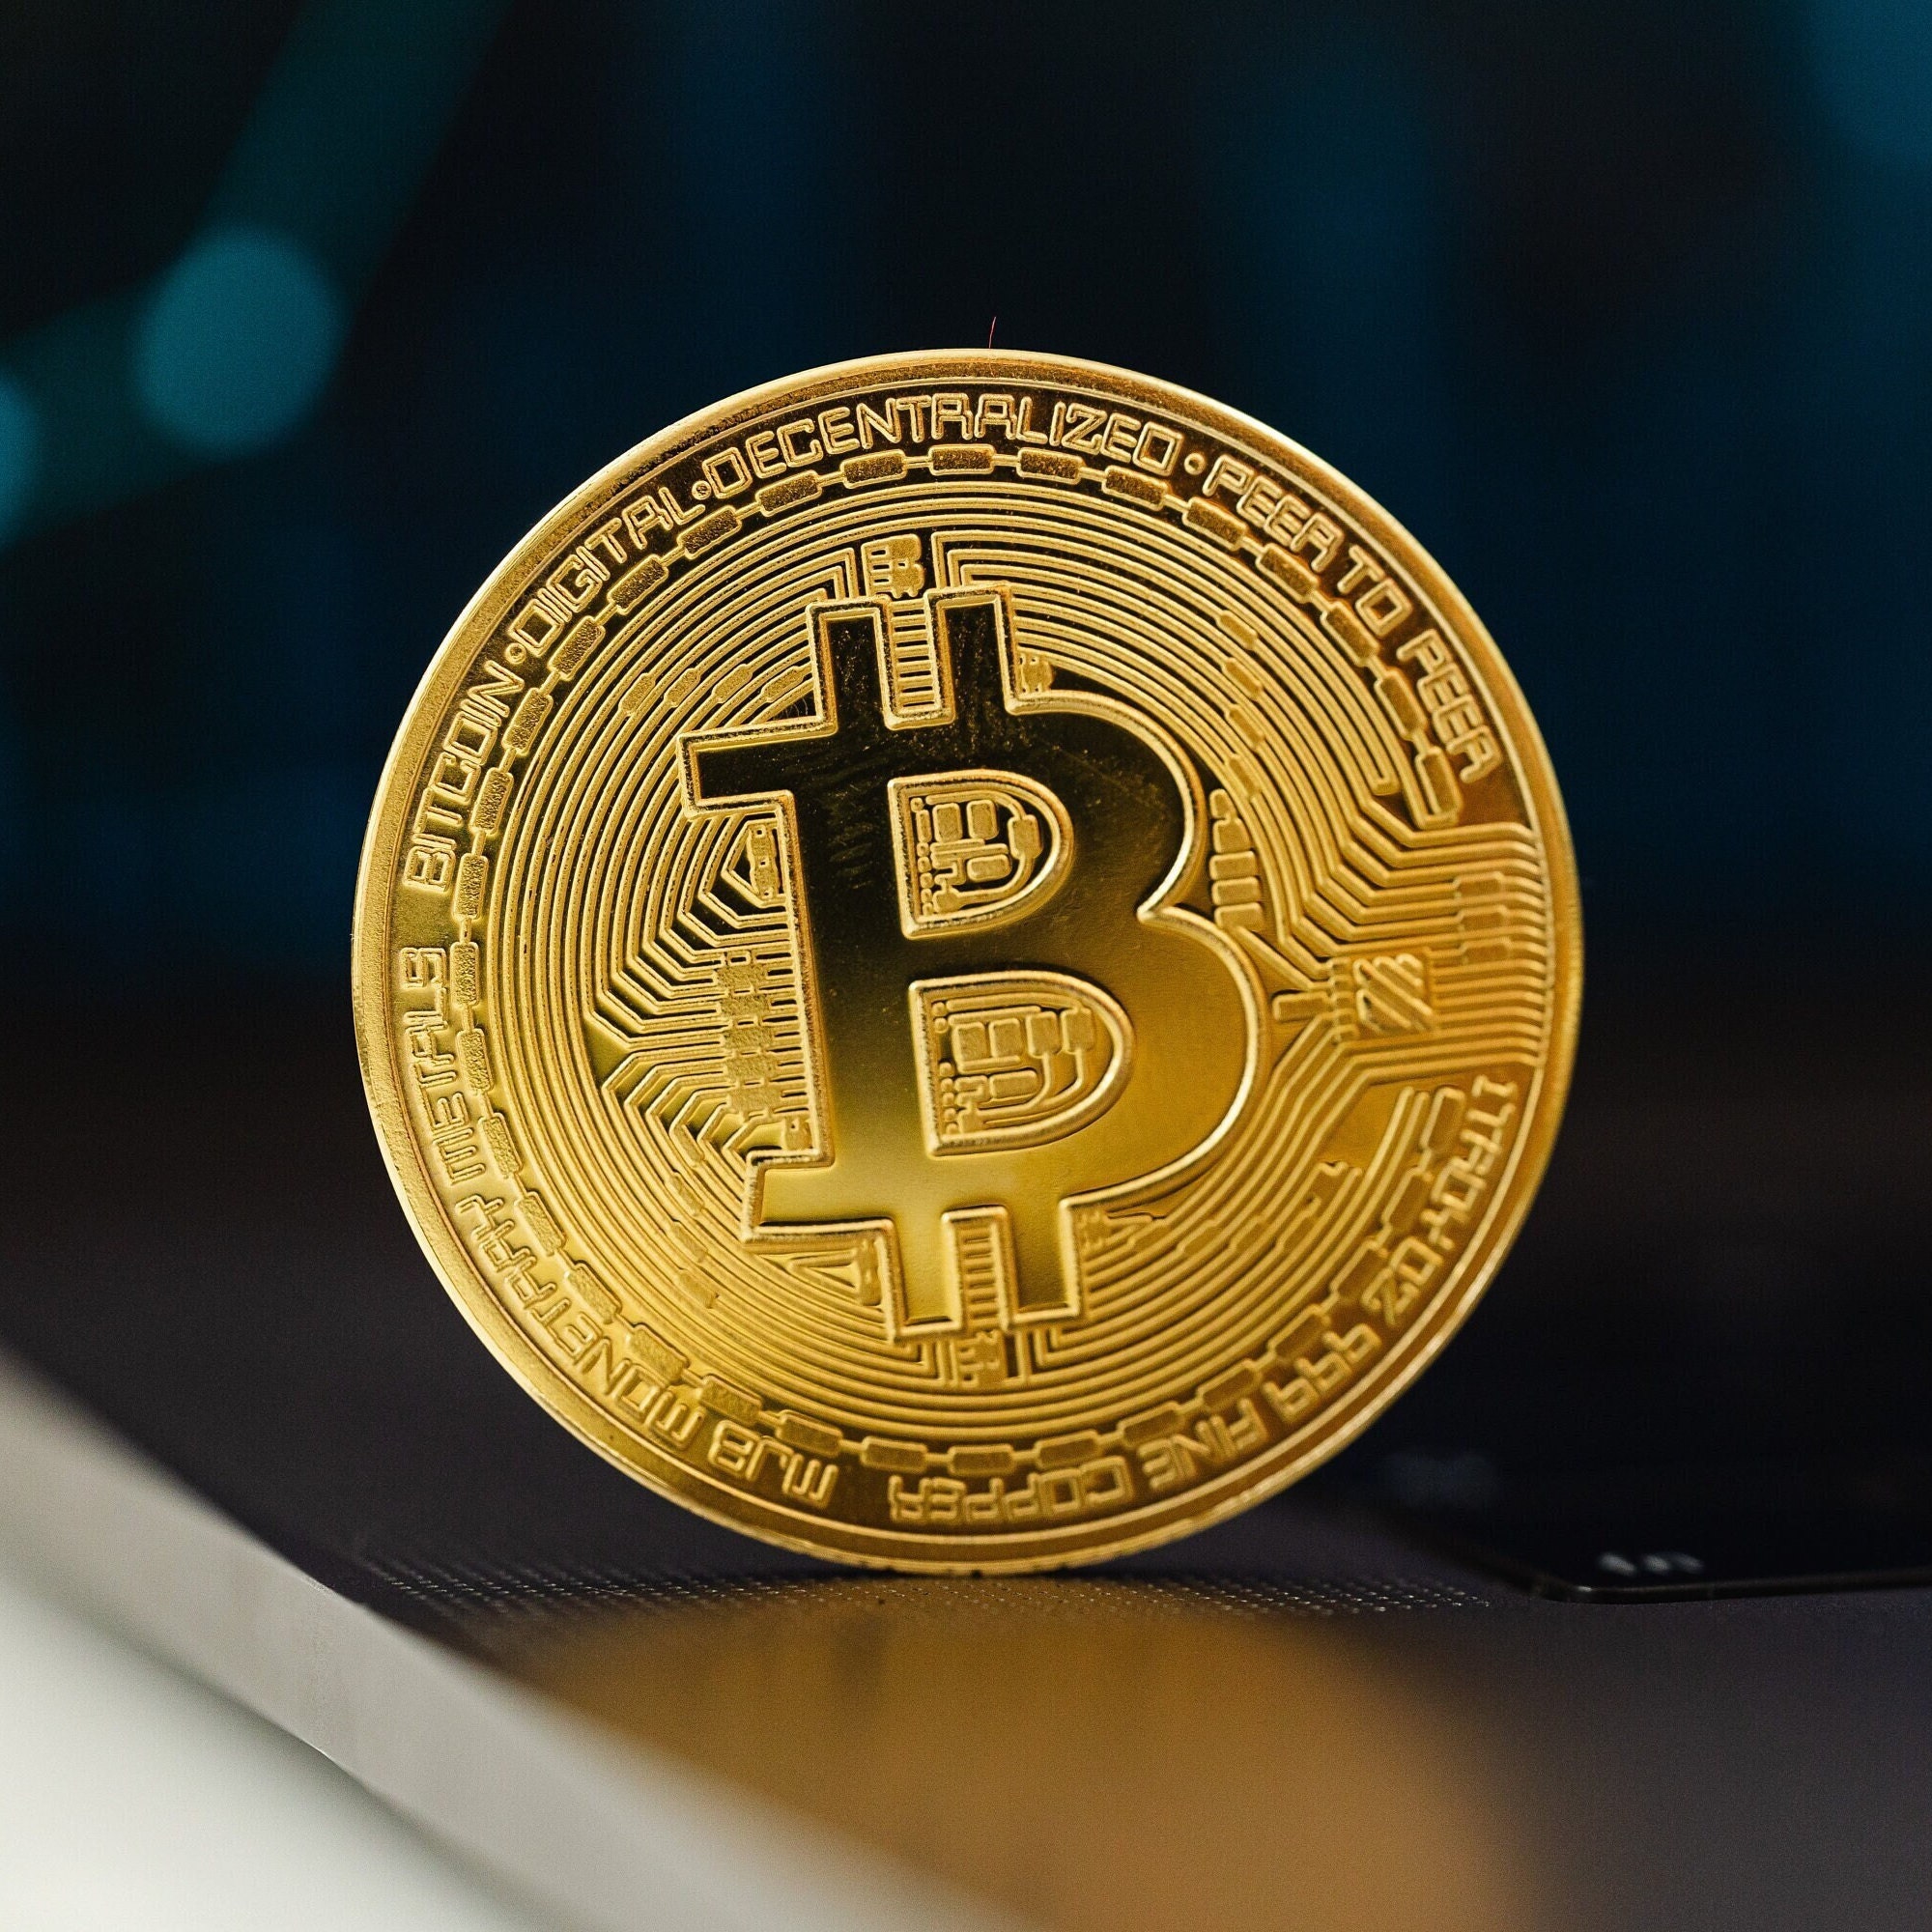 Bitcoin in physical, collectible form sold by Heritage